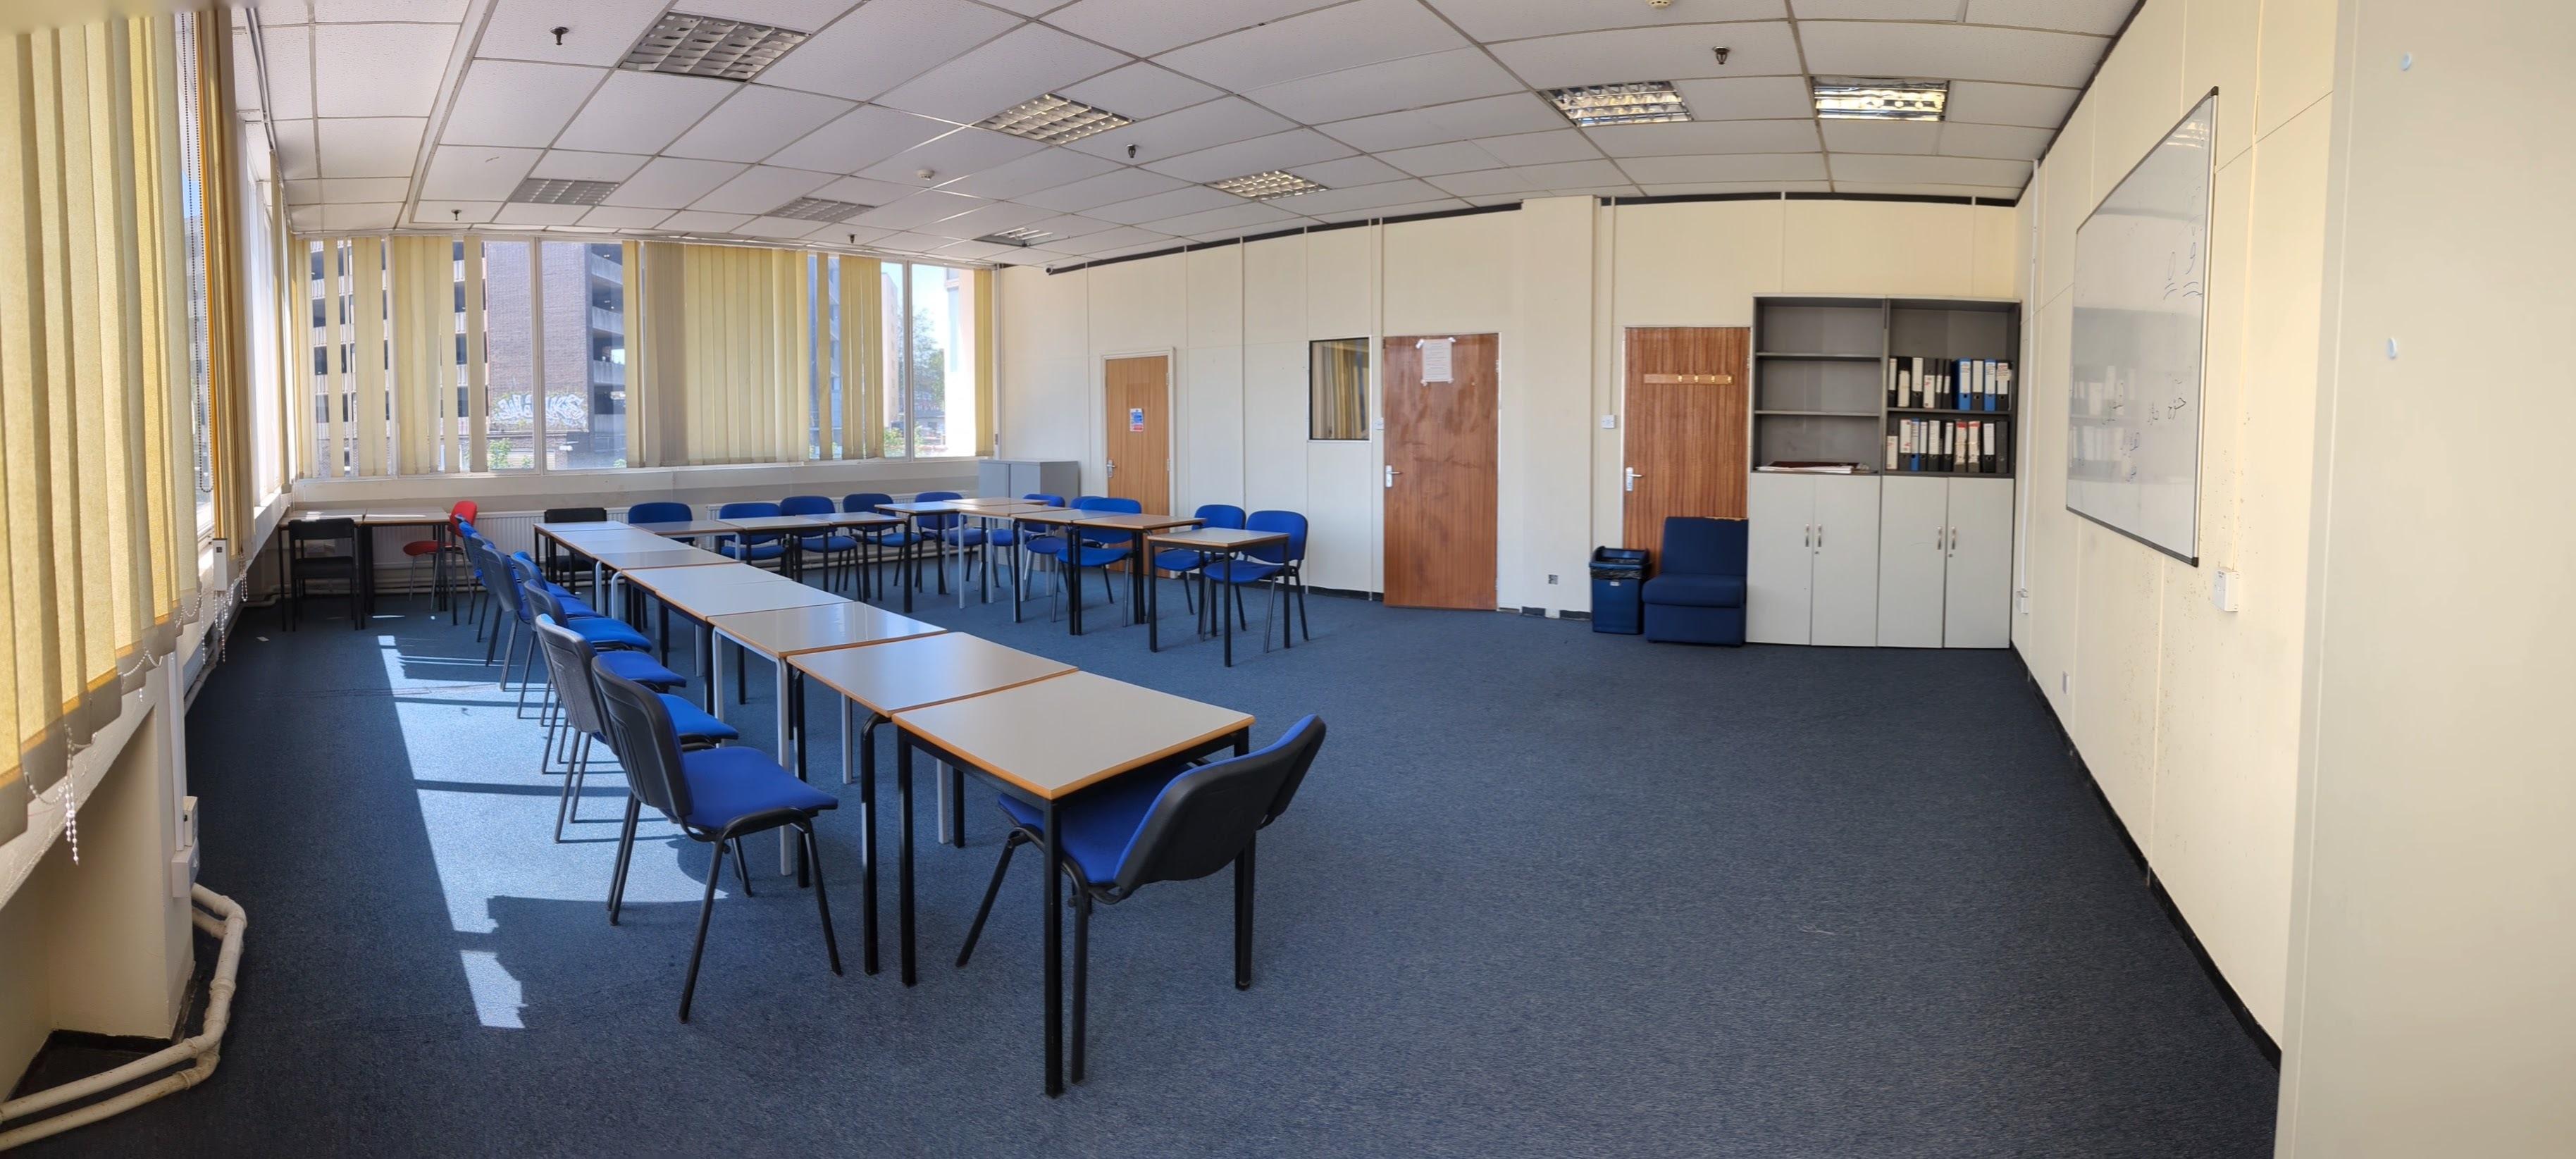 Classroom, The Woolwich College photo #2